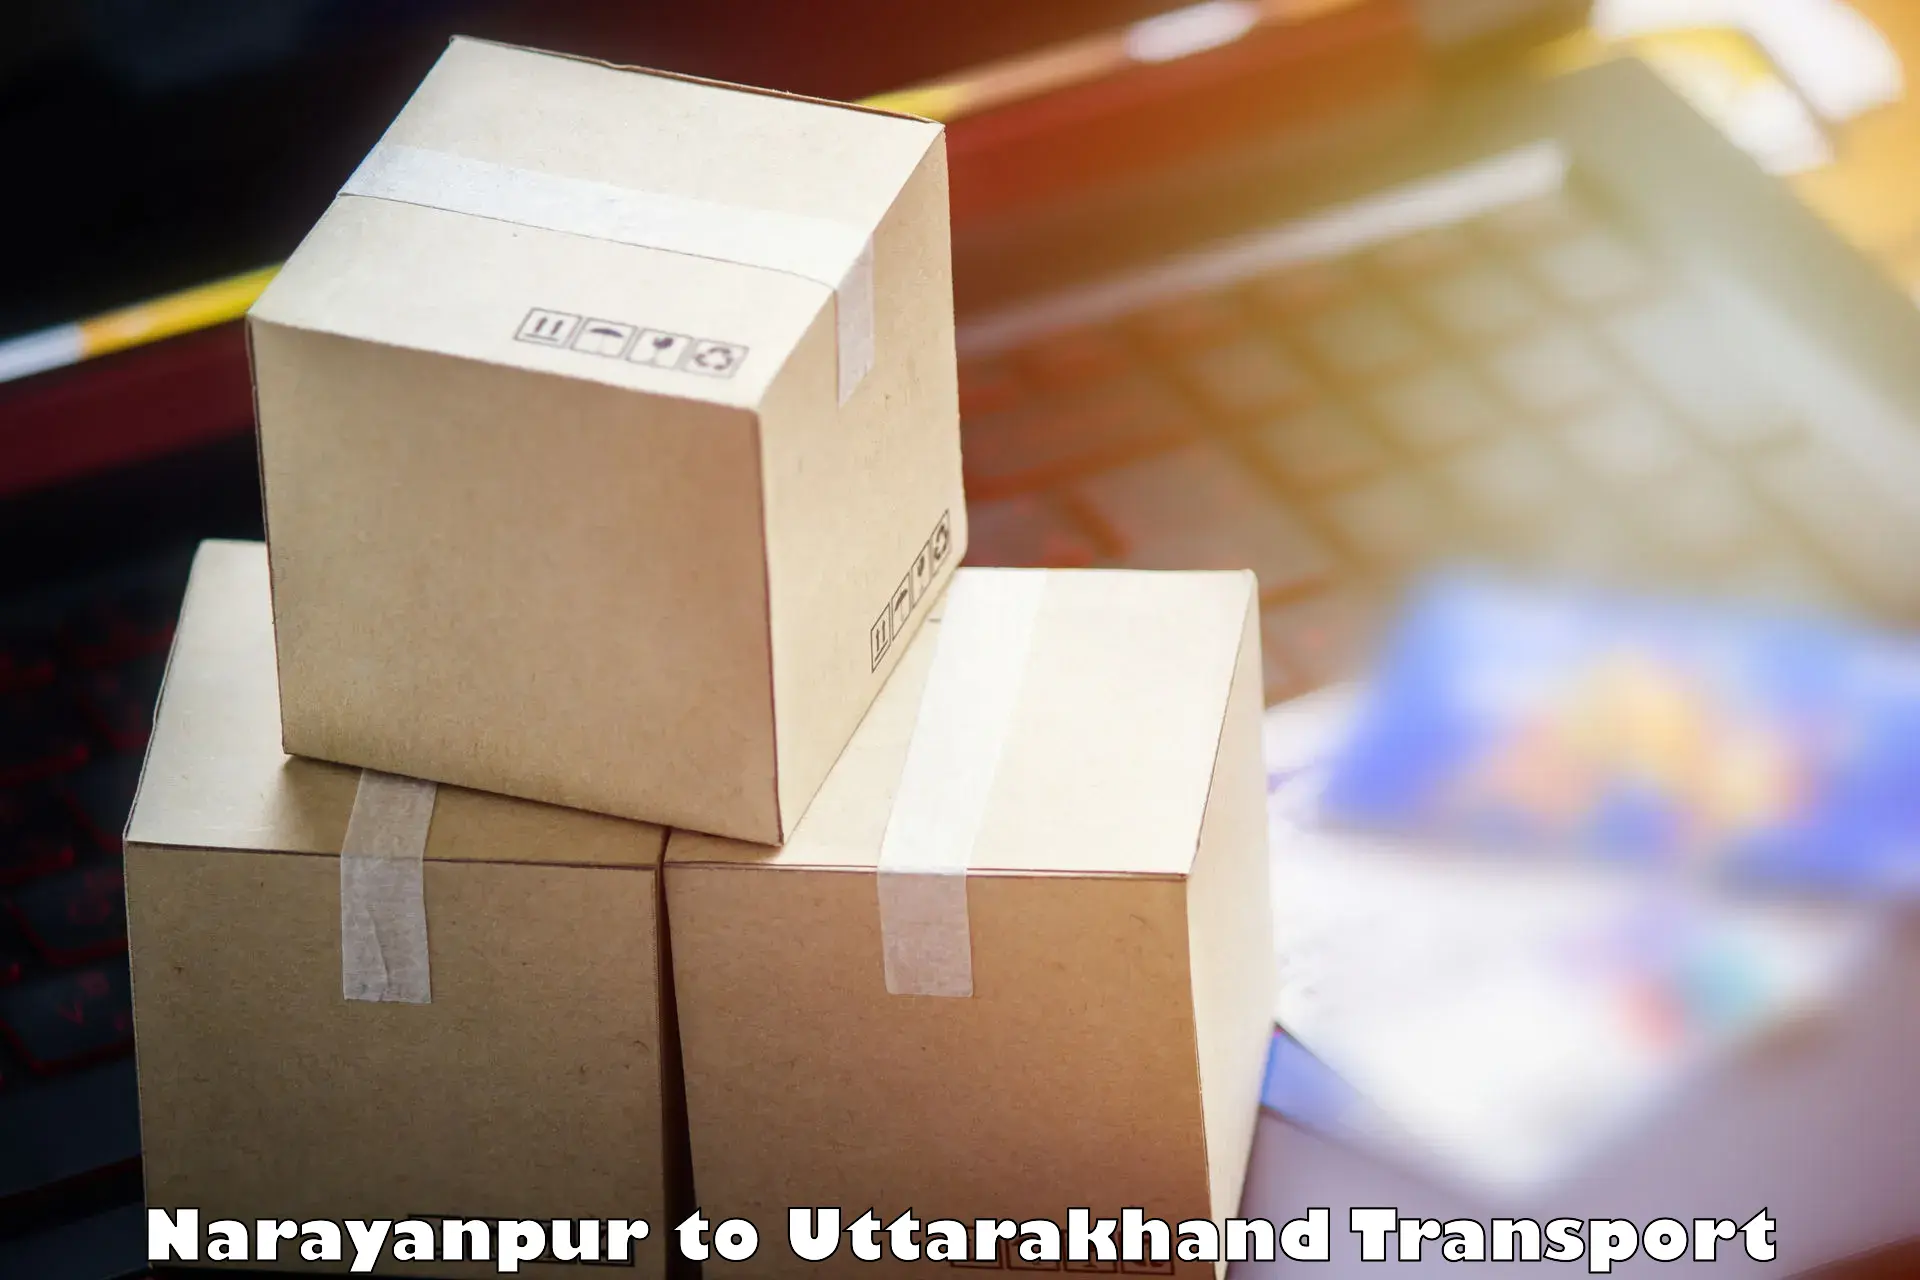 Container transport service Narayanpur to Haridwar